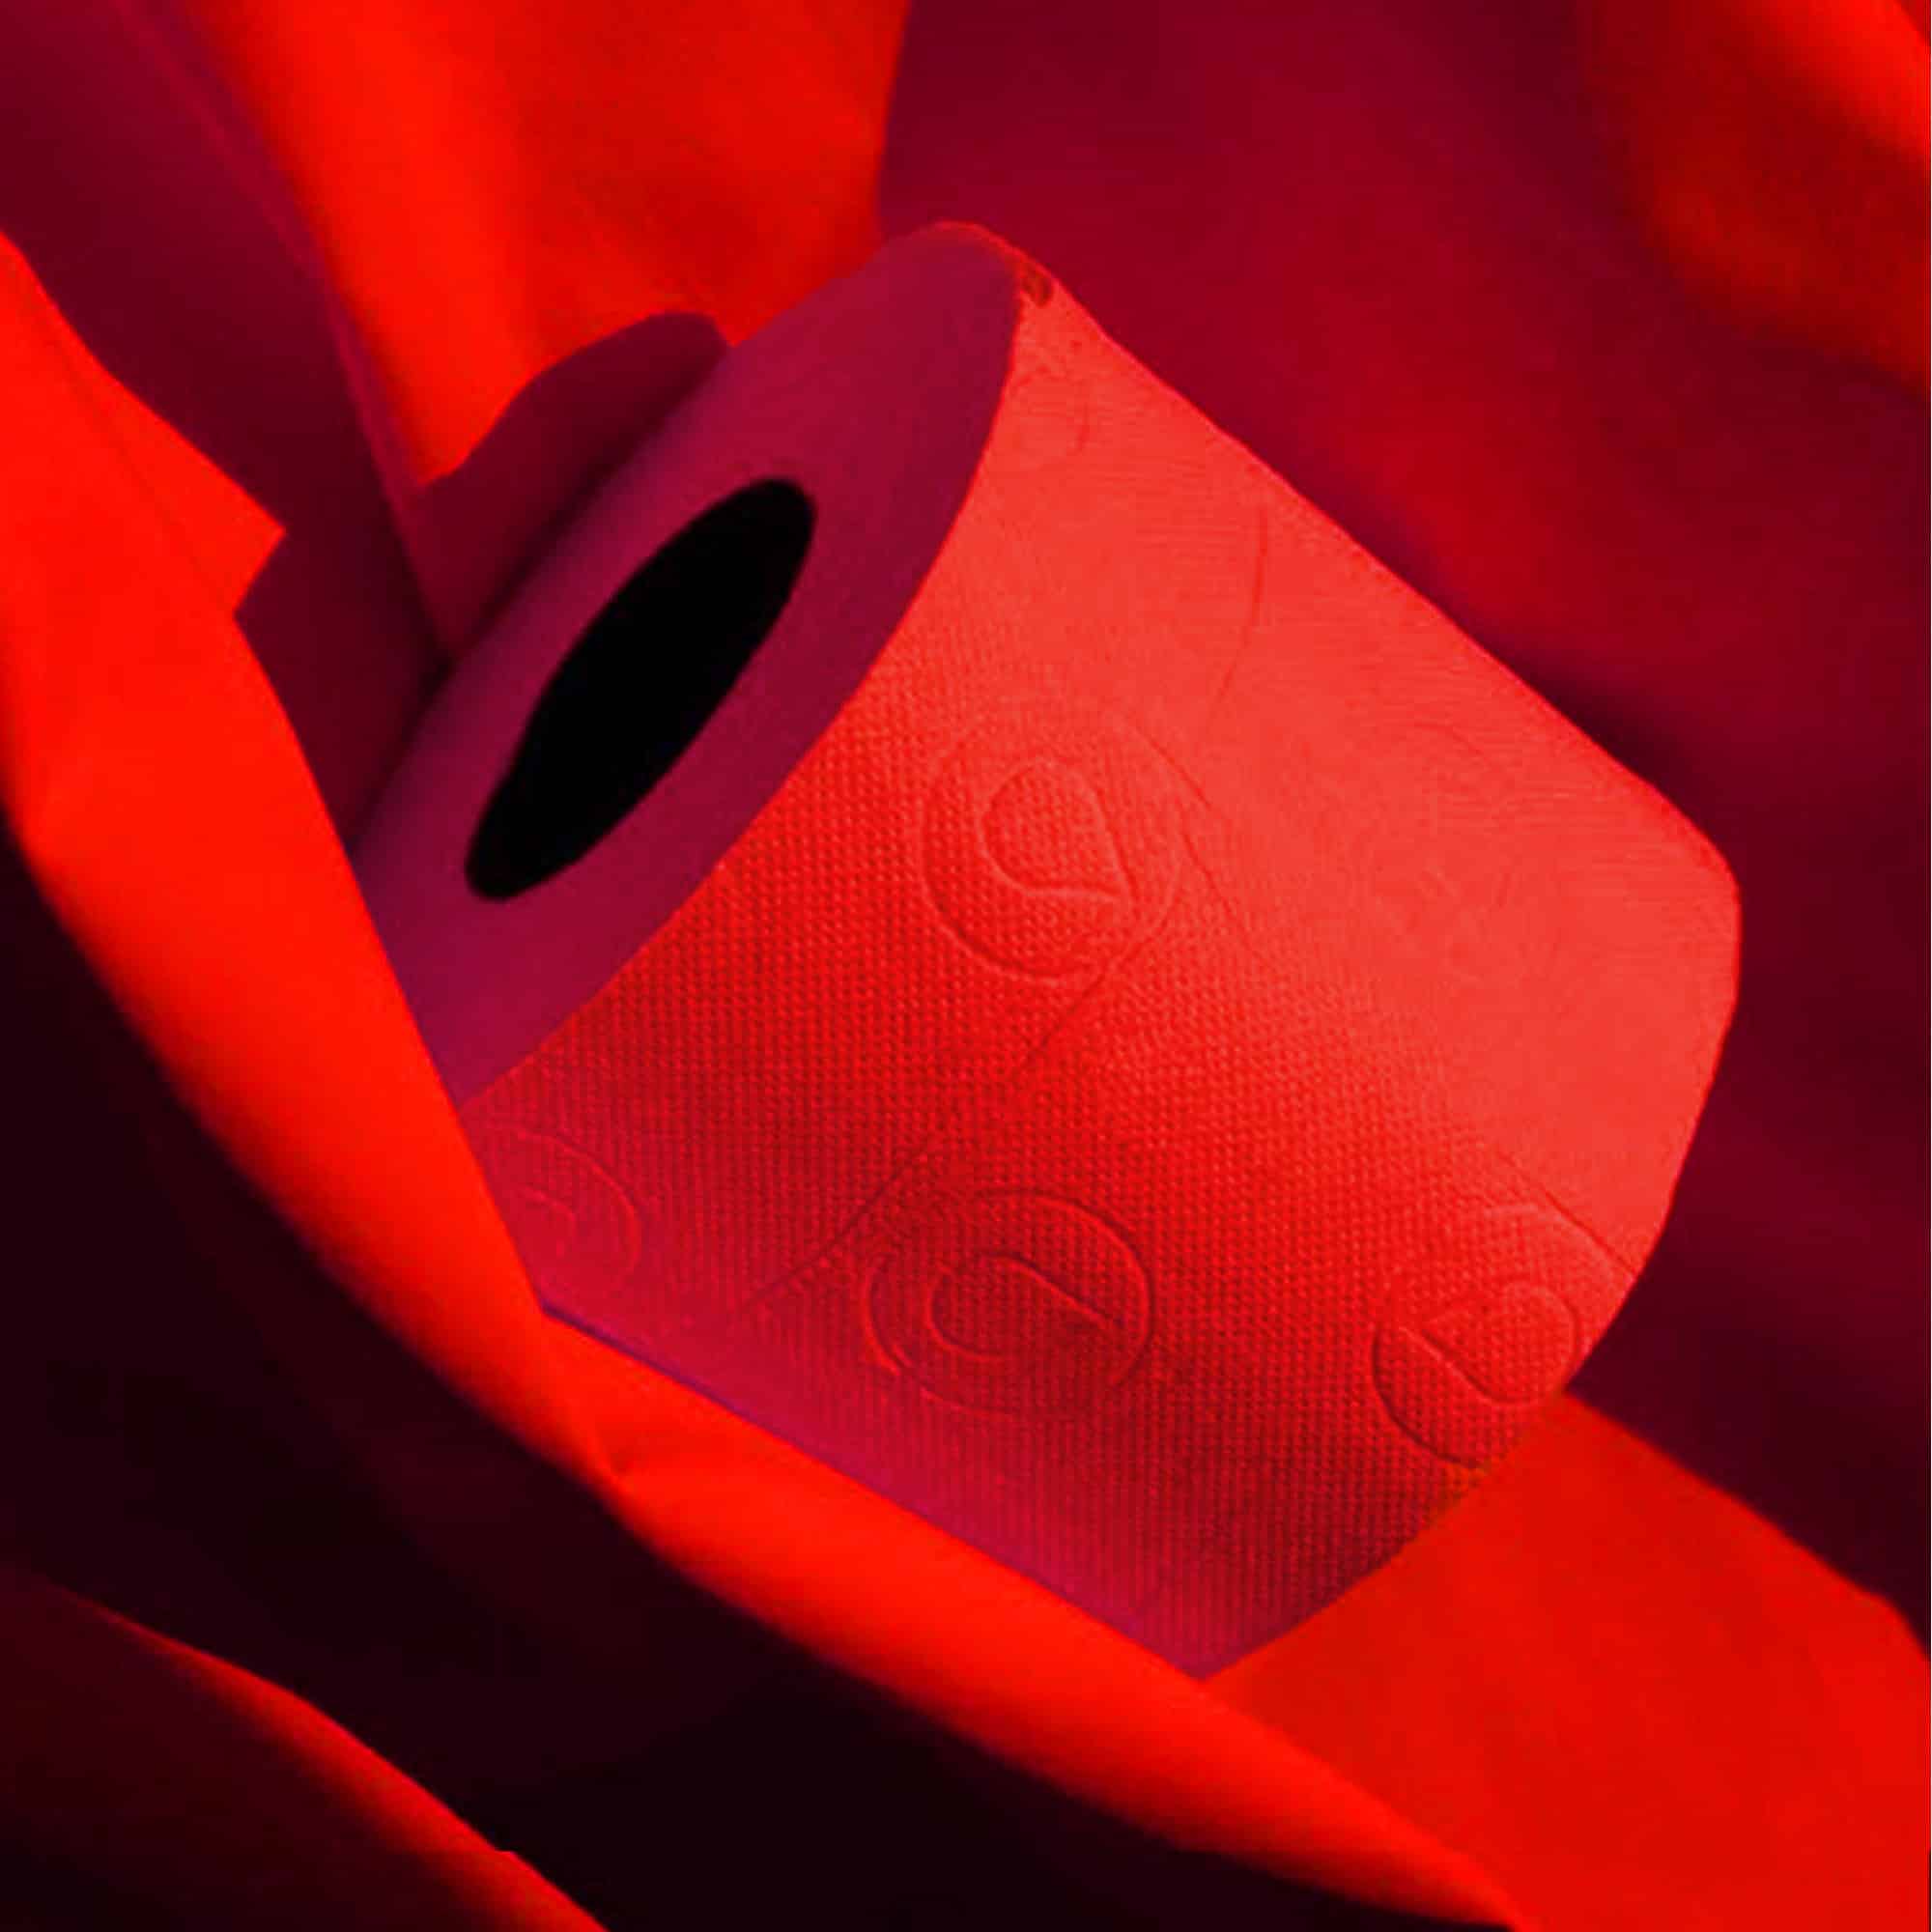 red pack 6 rolls tissue bog roll toilet paper bath colored scented loo strong 3-ply soft texture